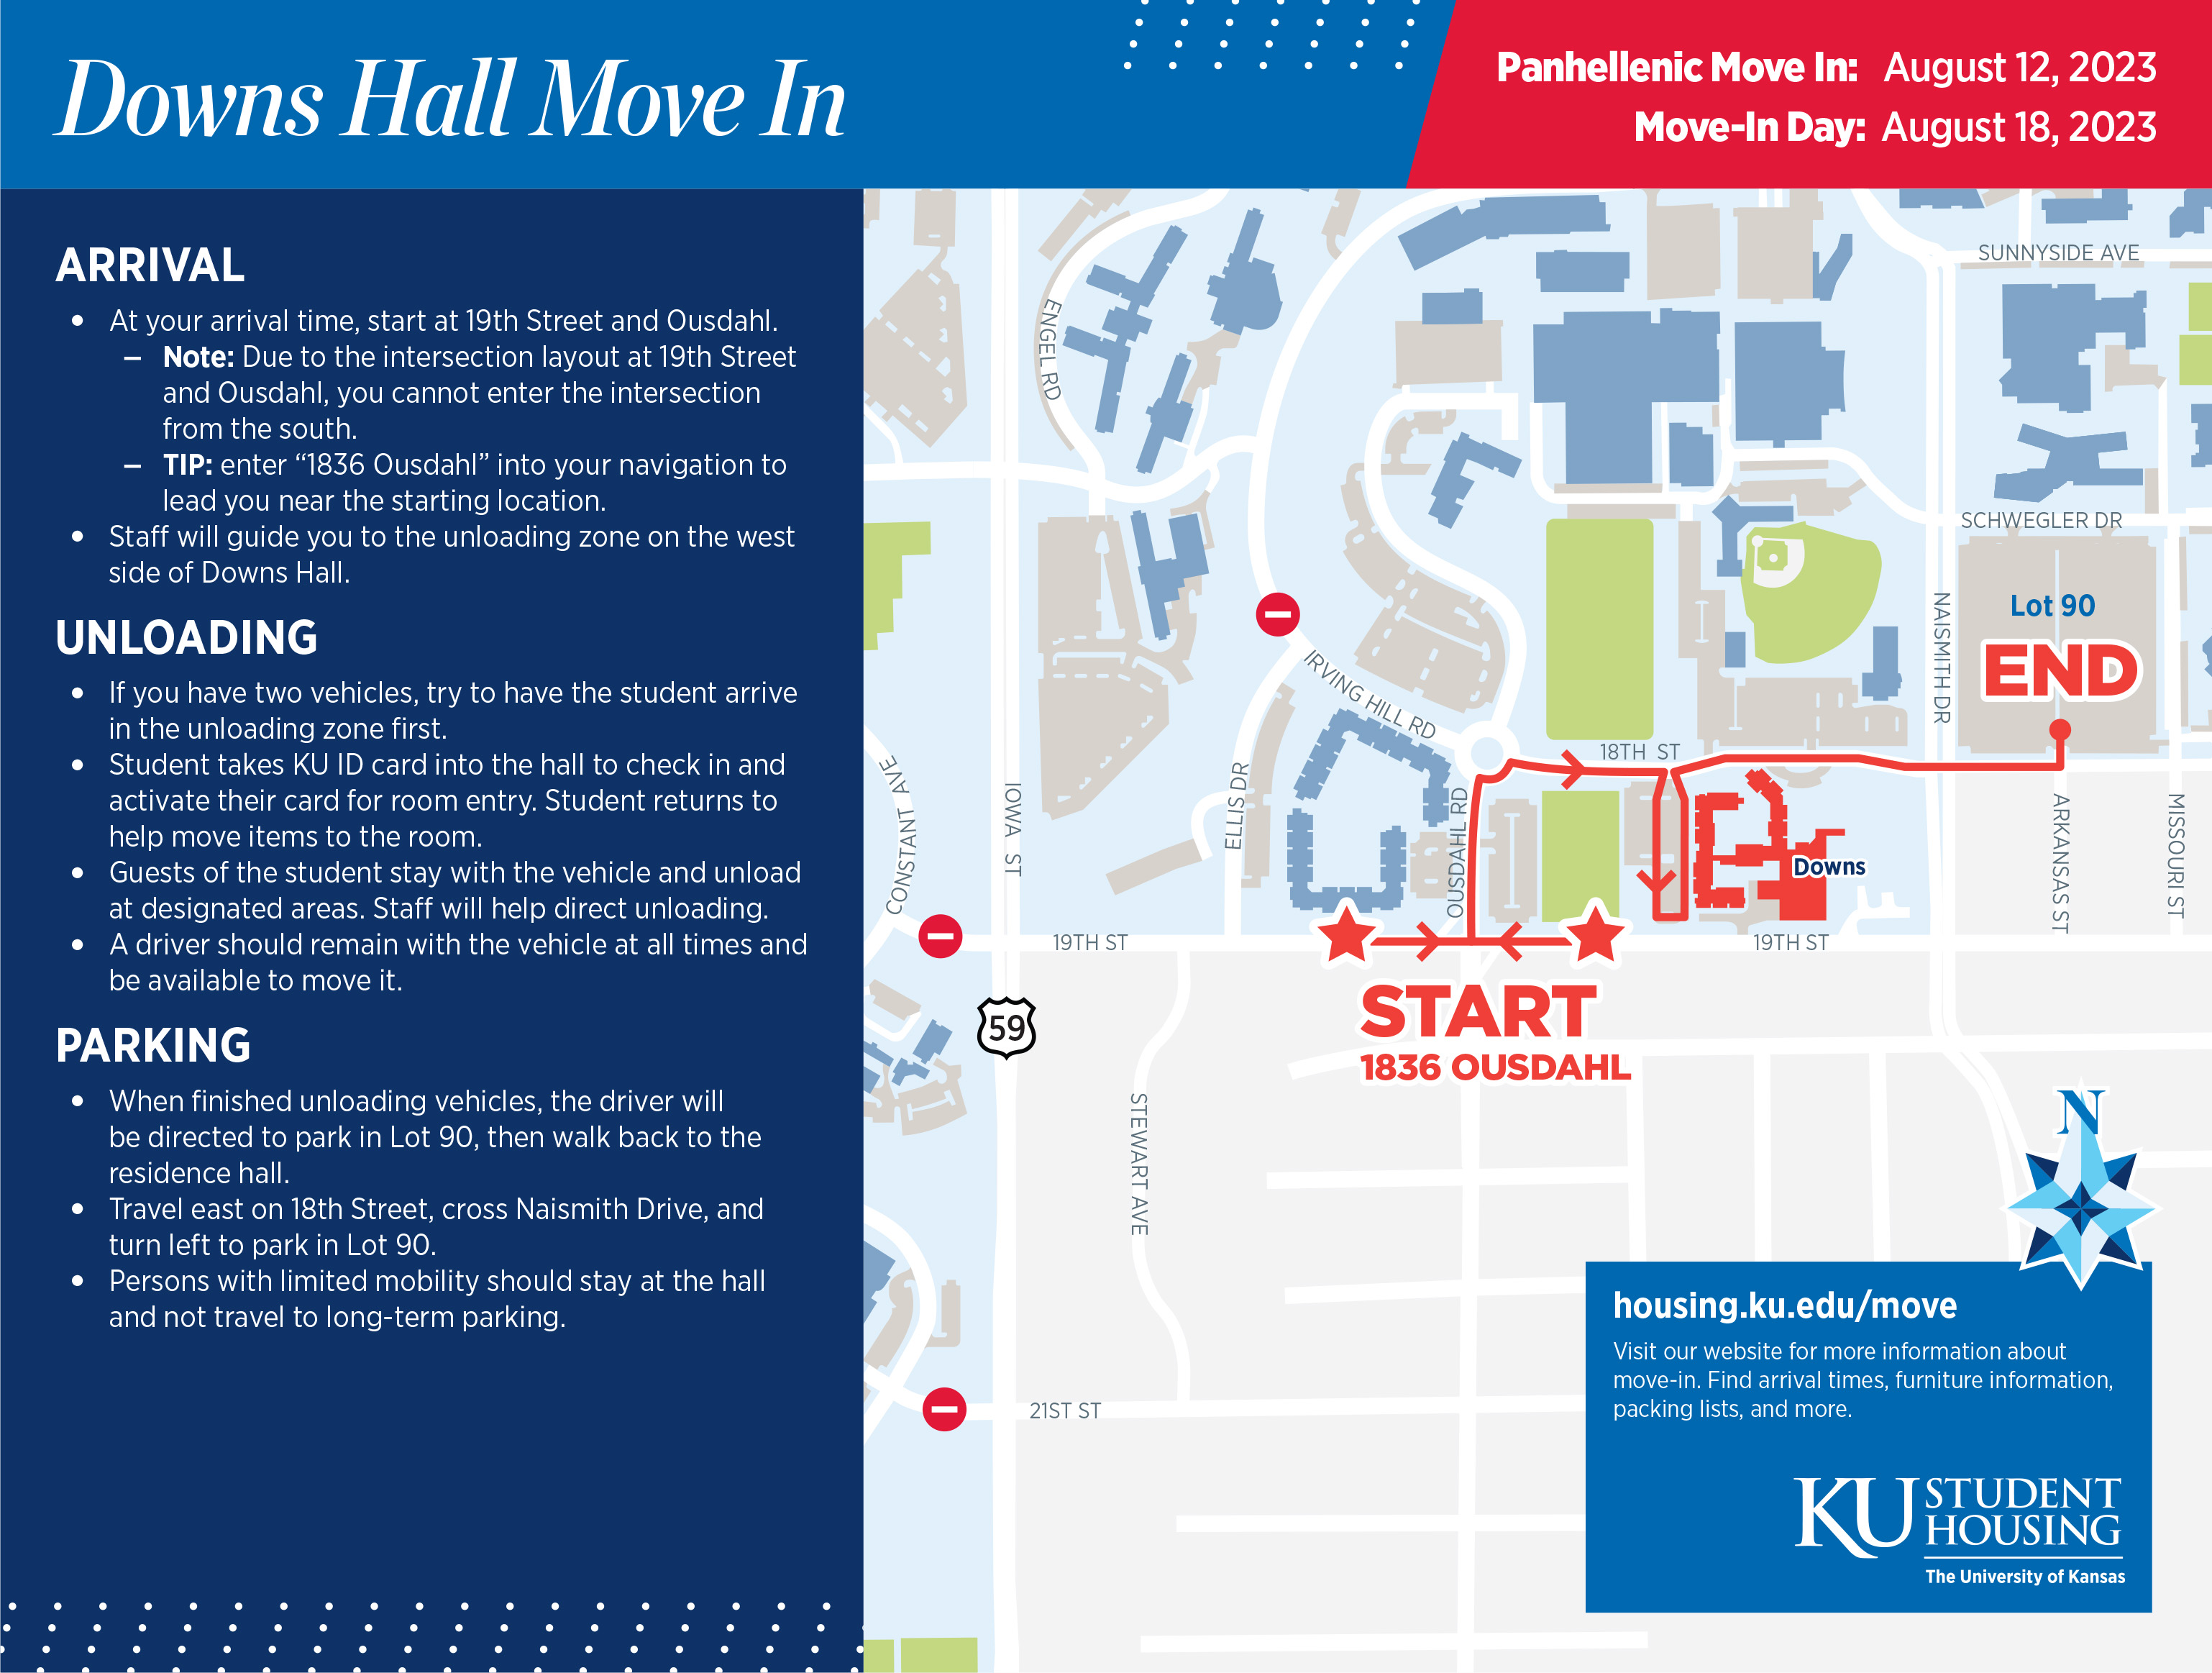 Naismith Hall move-in map preview image